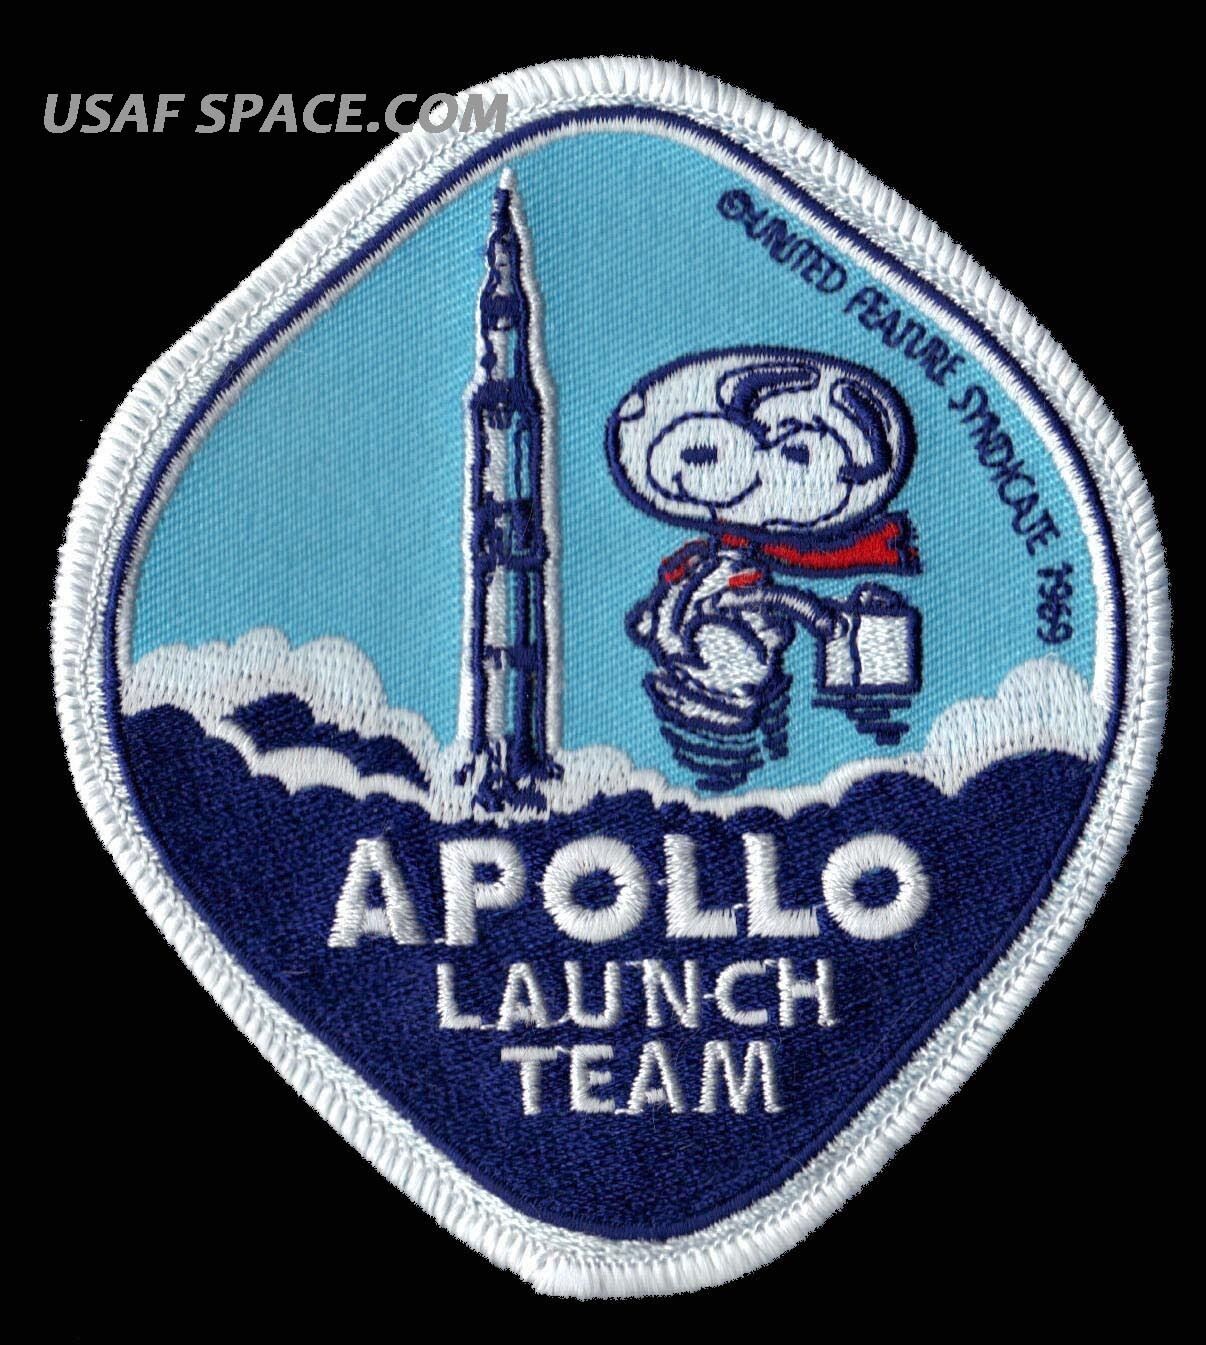 Snoopy - Apollo Launch Team - Nasa - 4.25" - Space Patch - Mint - Condition